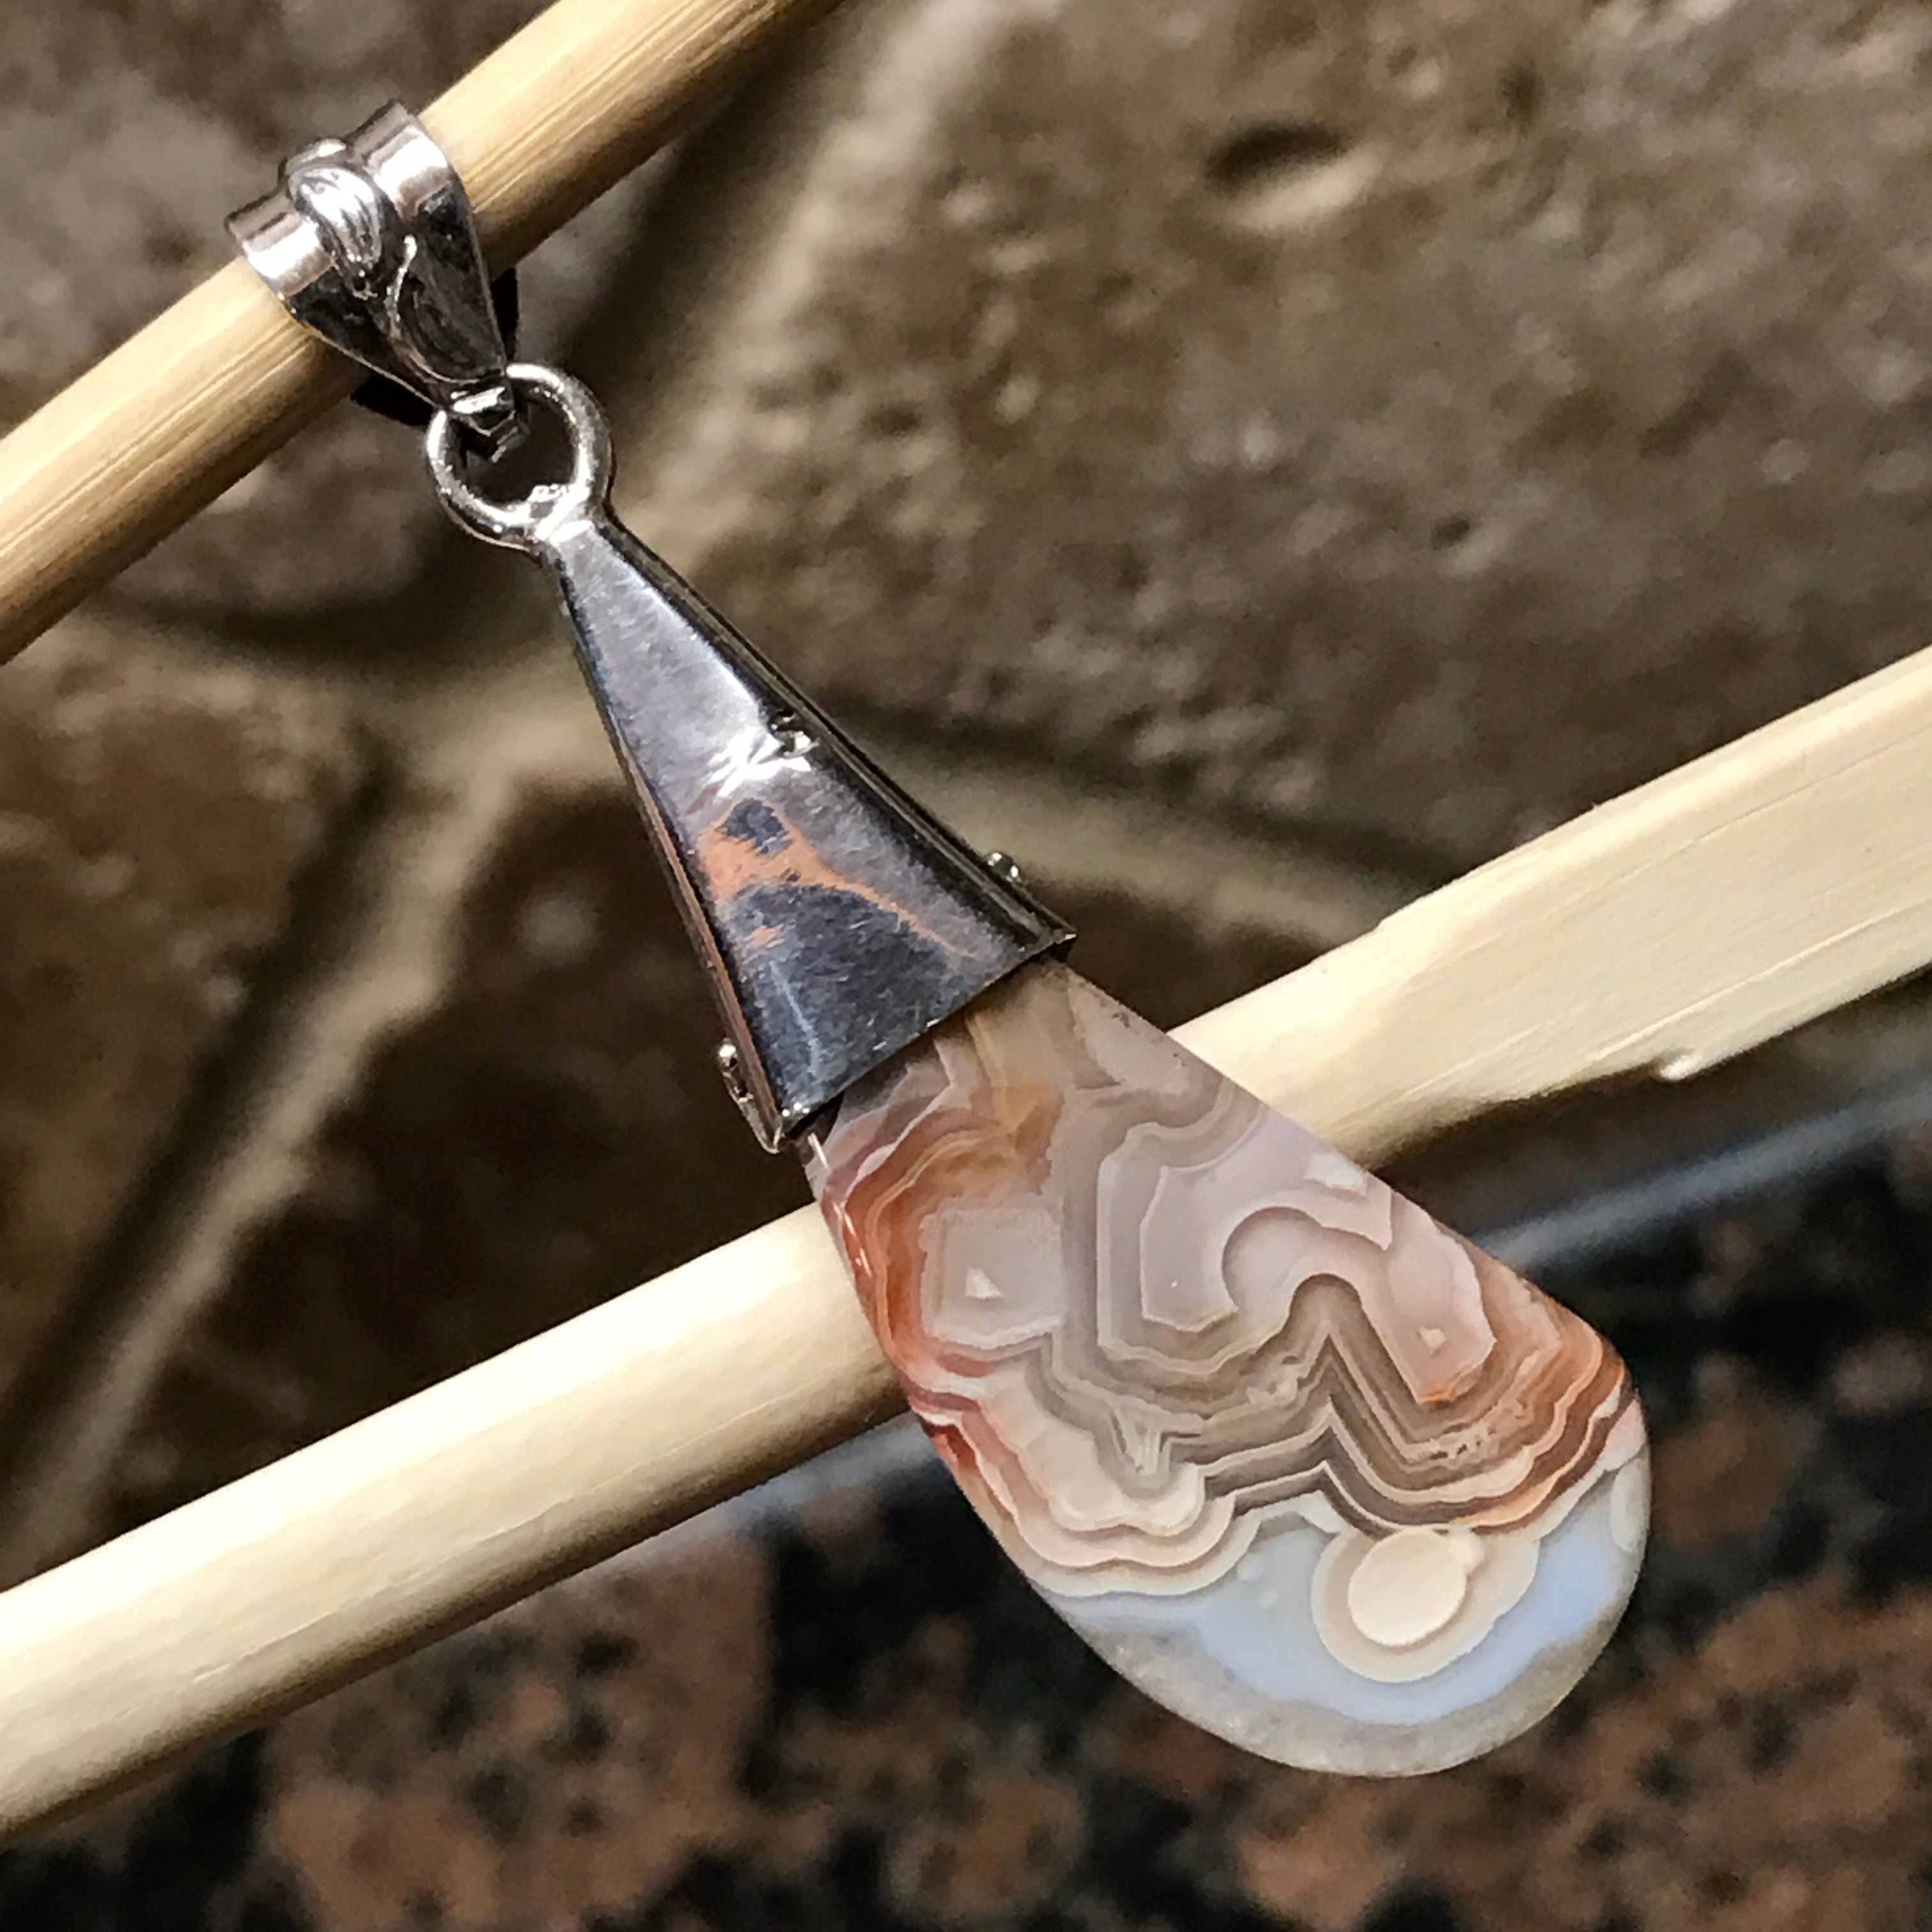 Natural Amethyst, Laguna Lace agate 925 Solid Sterling Silver Pendant 50mm - Natural Rocks by Kala